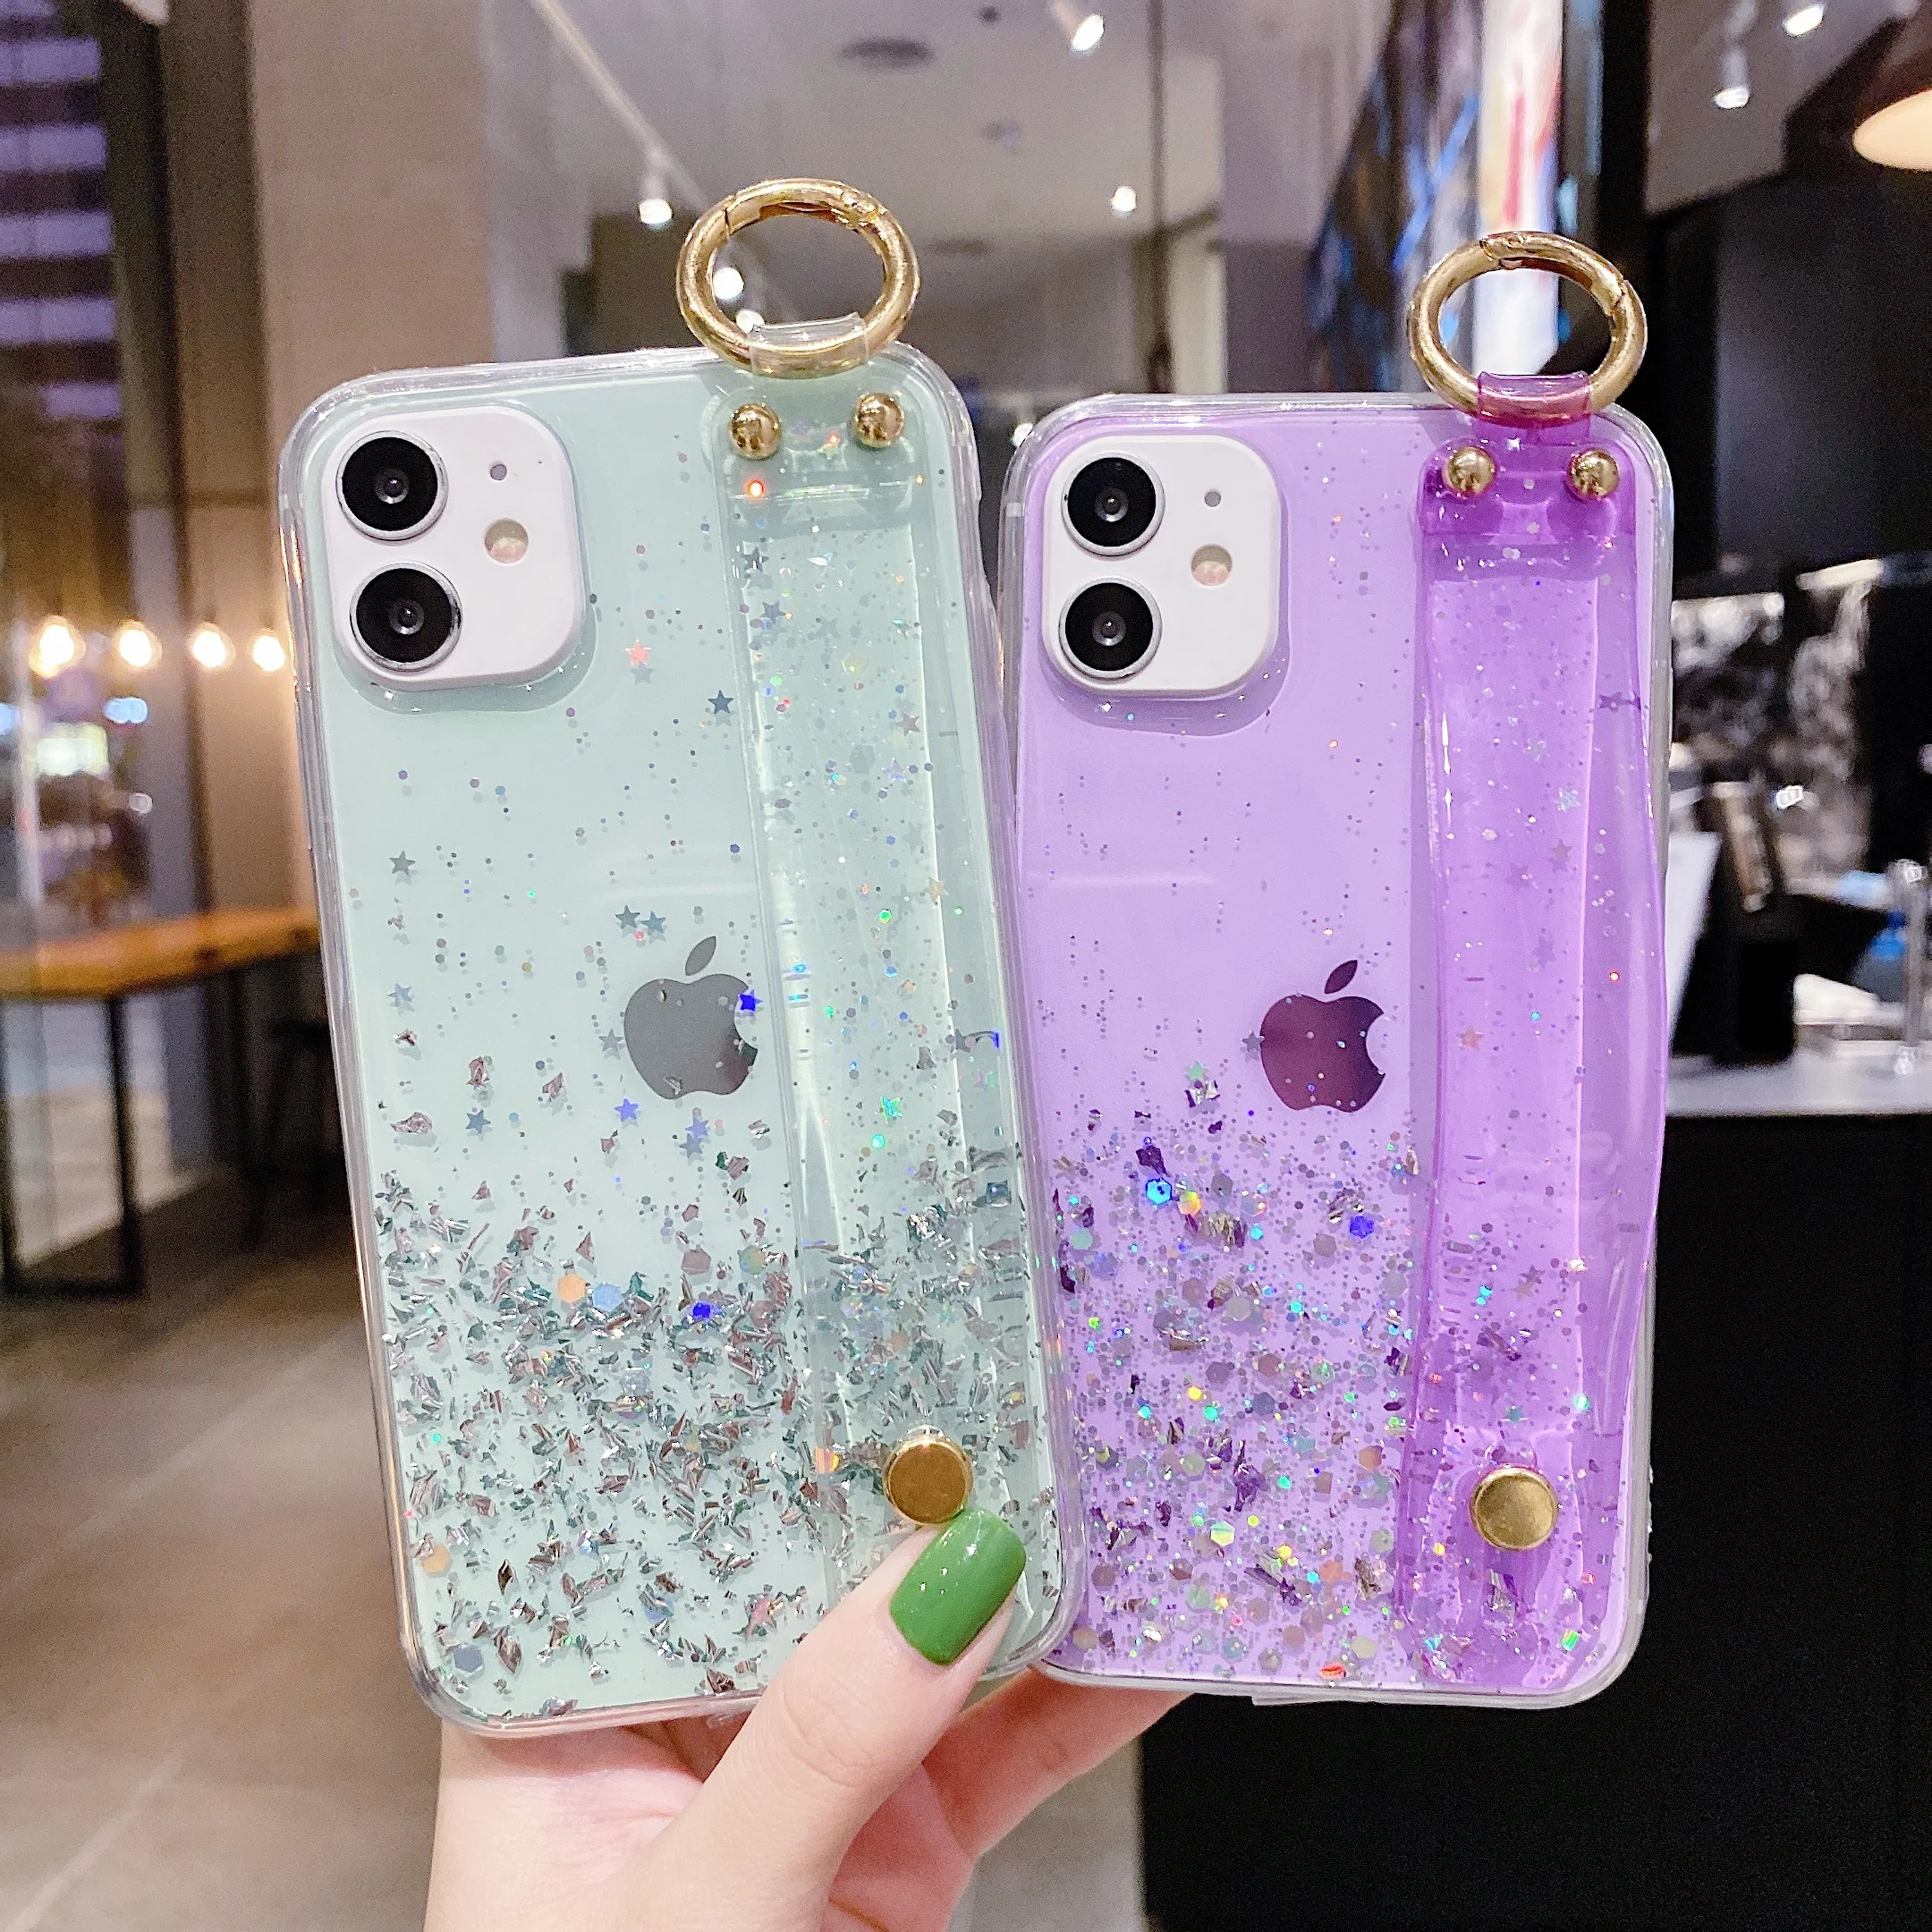 

Luxury Wrist Glitter Bling Soft Rubber Case Cover shell for iphone 6/7/8 7P/8P X XS XR XSMAX 11 PRO 12 12 PRO MAX